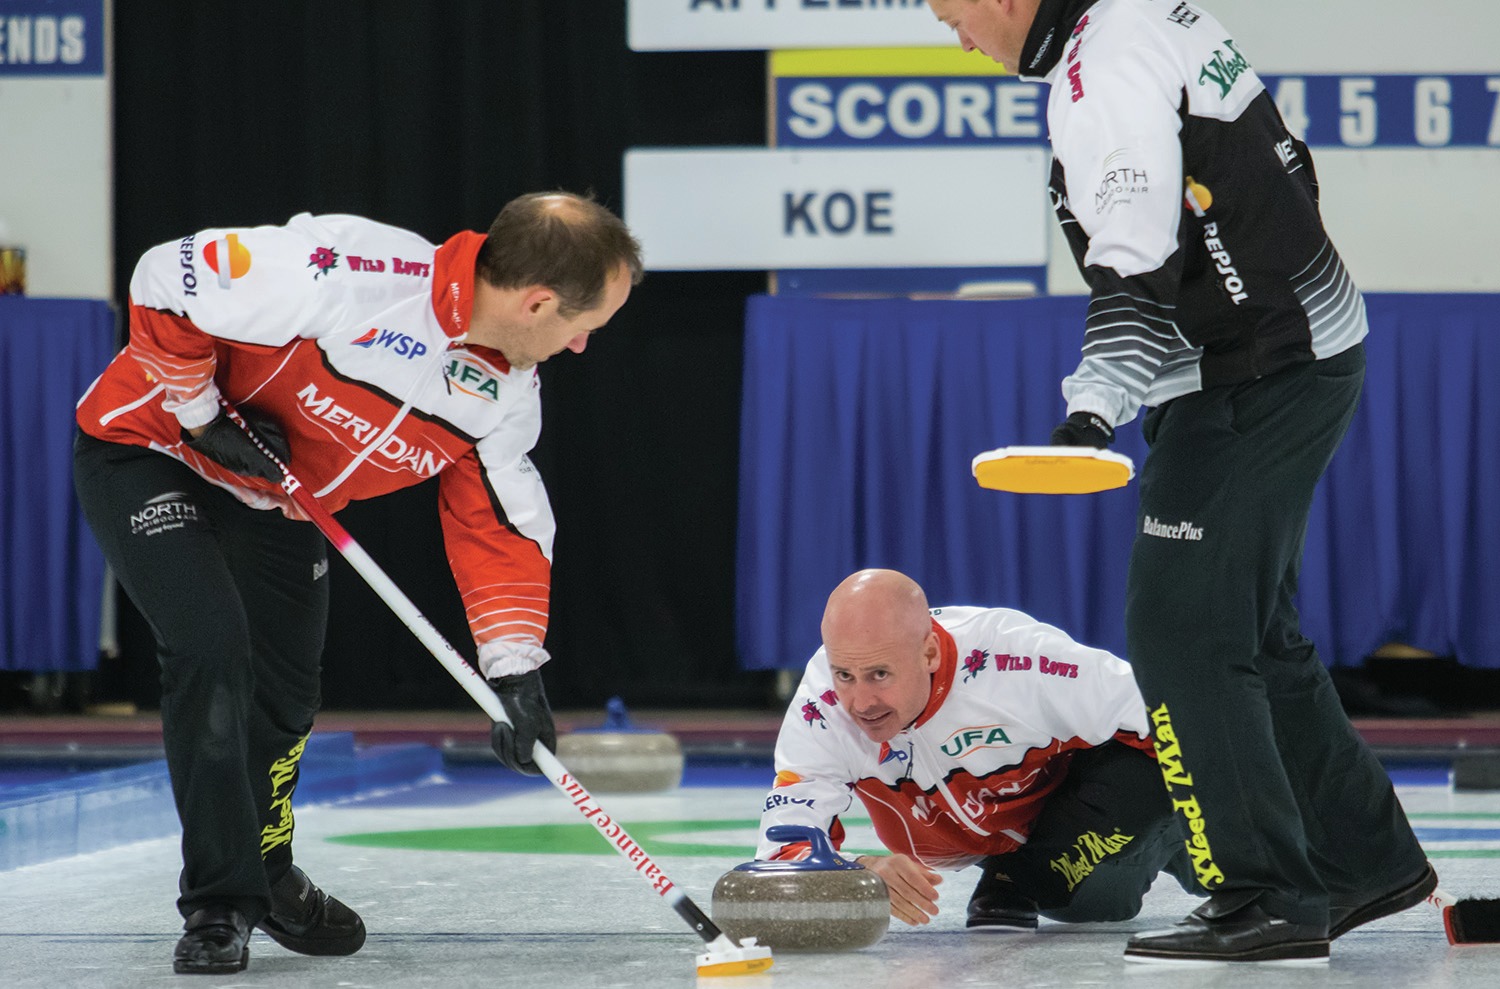 TOP DOG - World Champion Skip Kevin Koe threw a rock during the final of the Red Deer Curling Classic World Curling Tour event at the Red Deer Curling Club on Monday. Koe defeated Ted Appelman 6-5 in extra ends to win the championship.